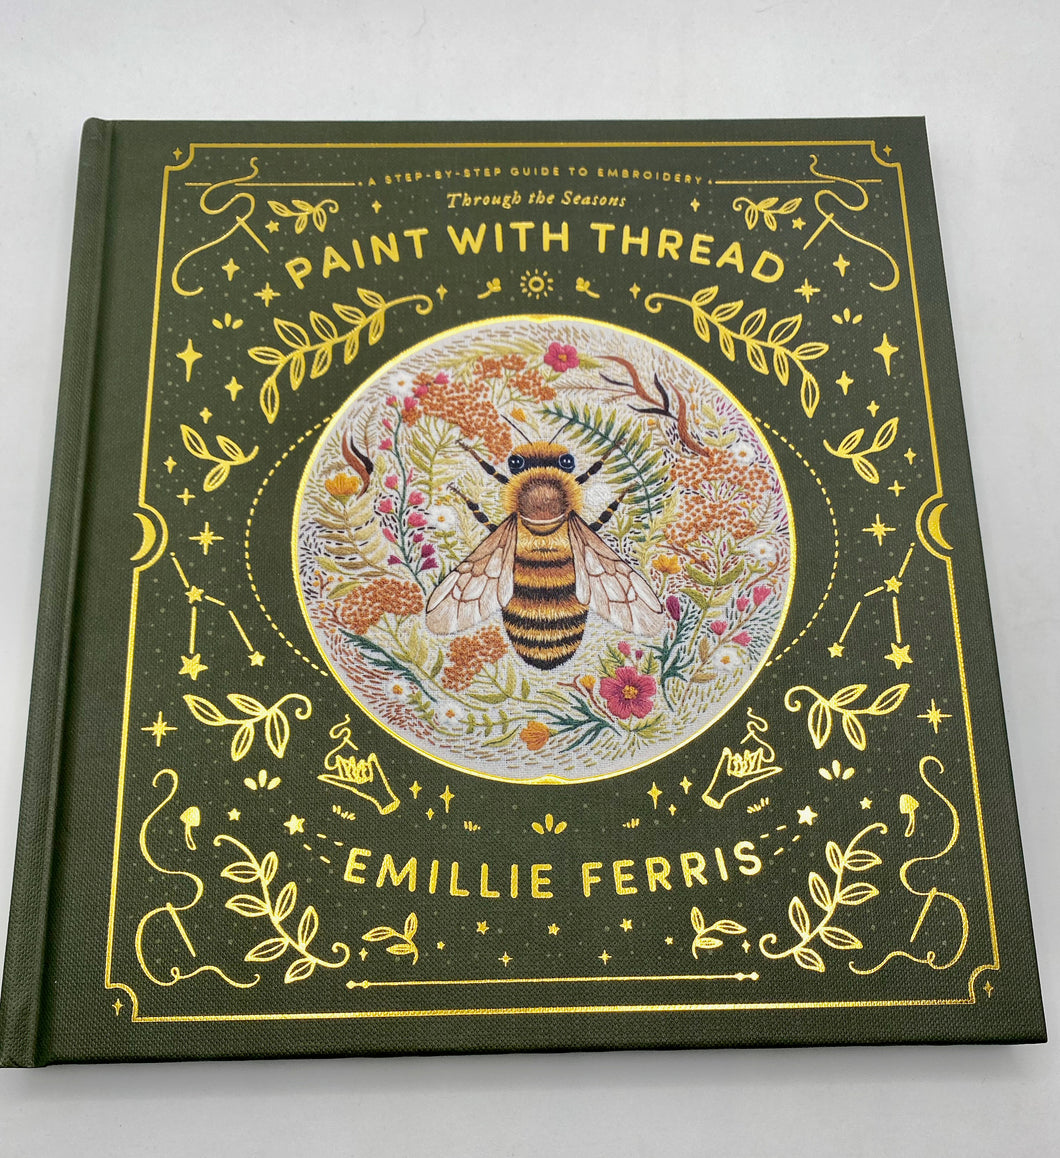 Paint with Thread: A step-by-step guide to embroidery through the seasons by Emillie Ferris